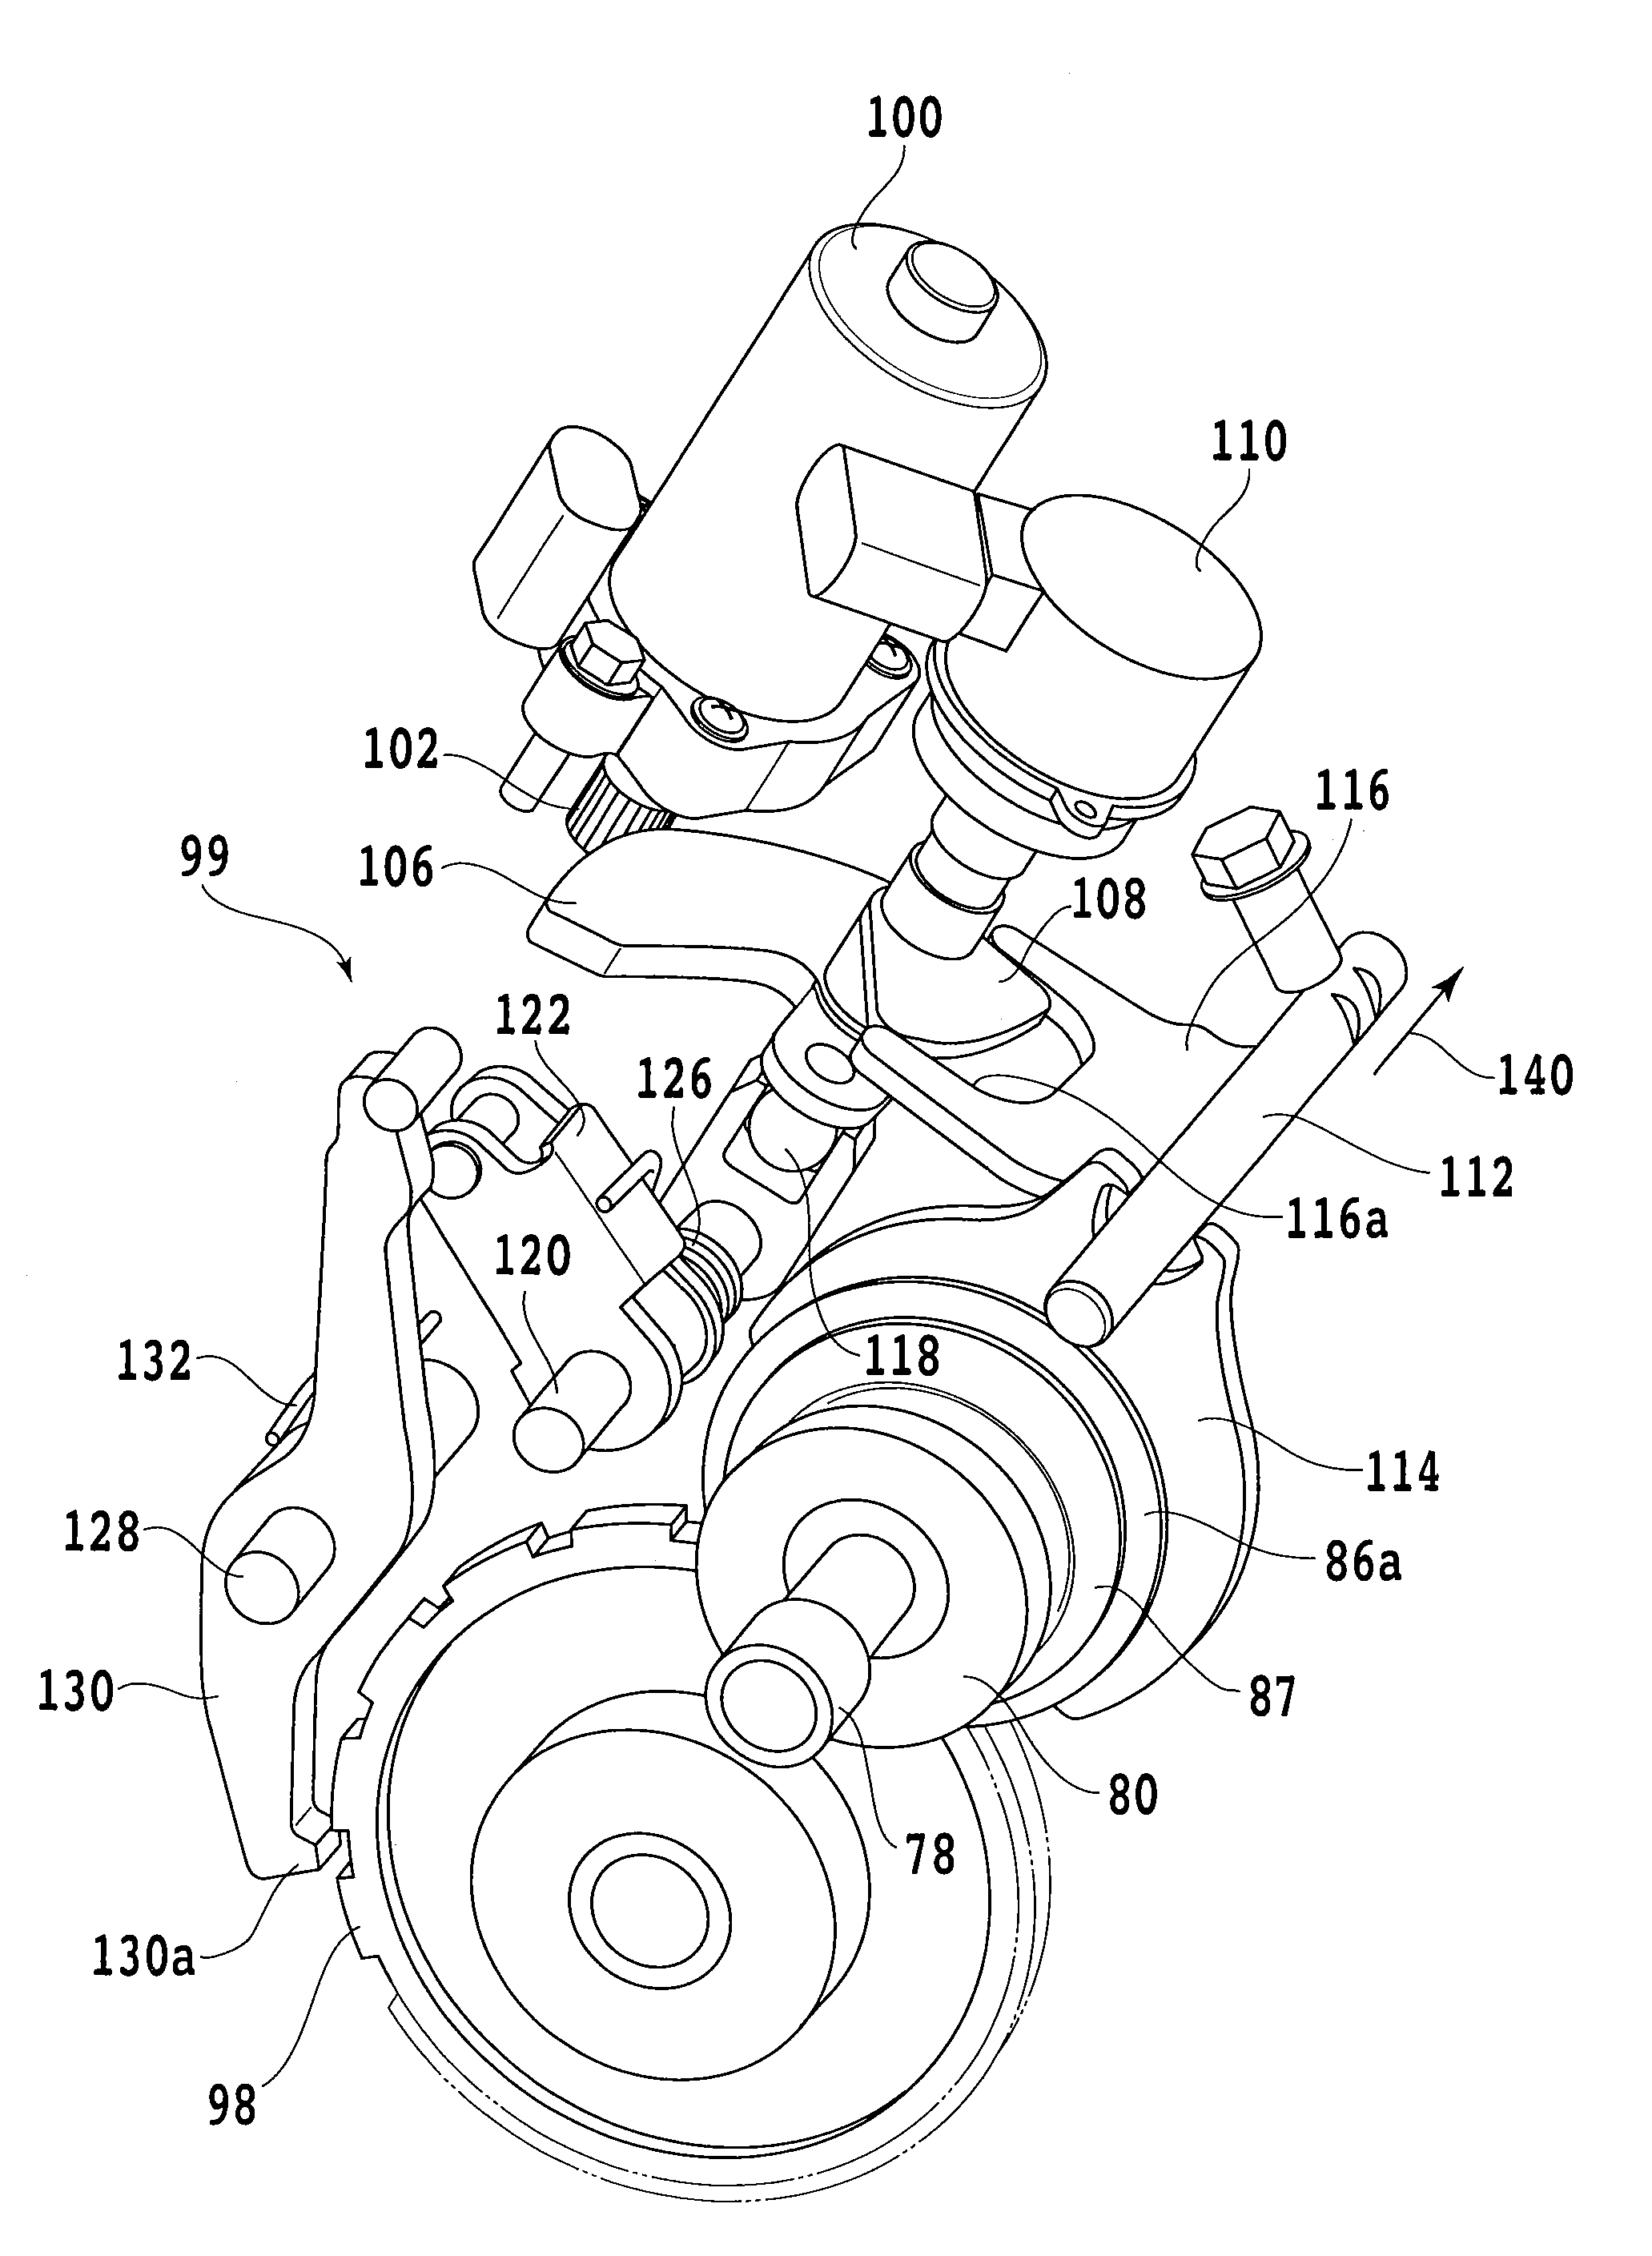 Drive force transmitting apparatus for vehicle